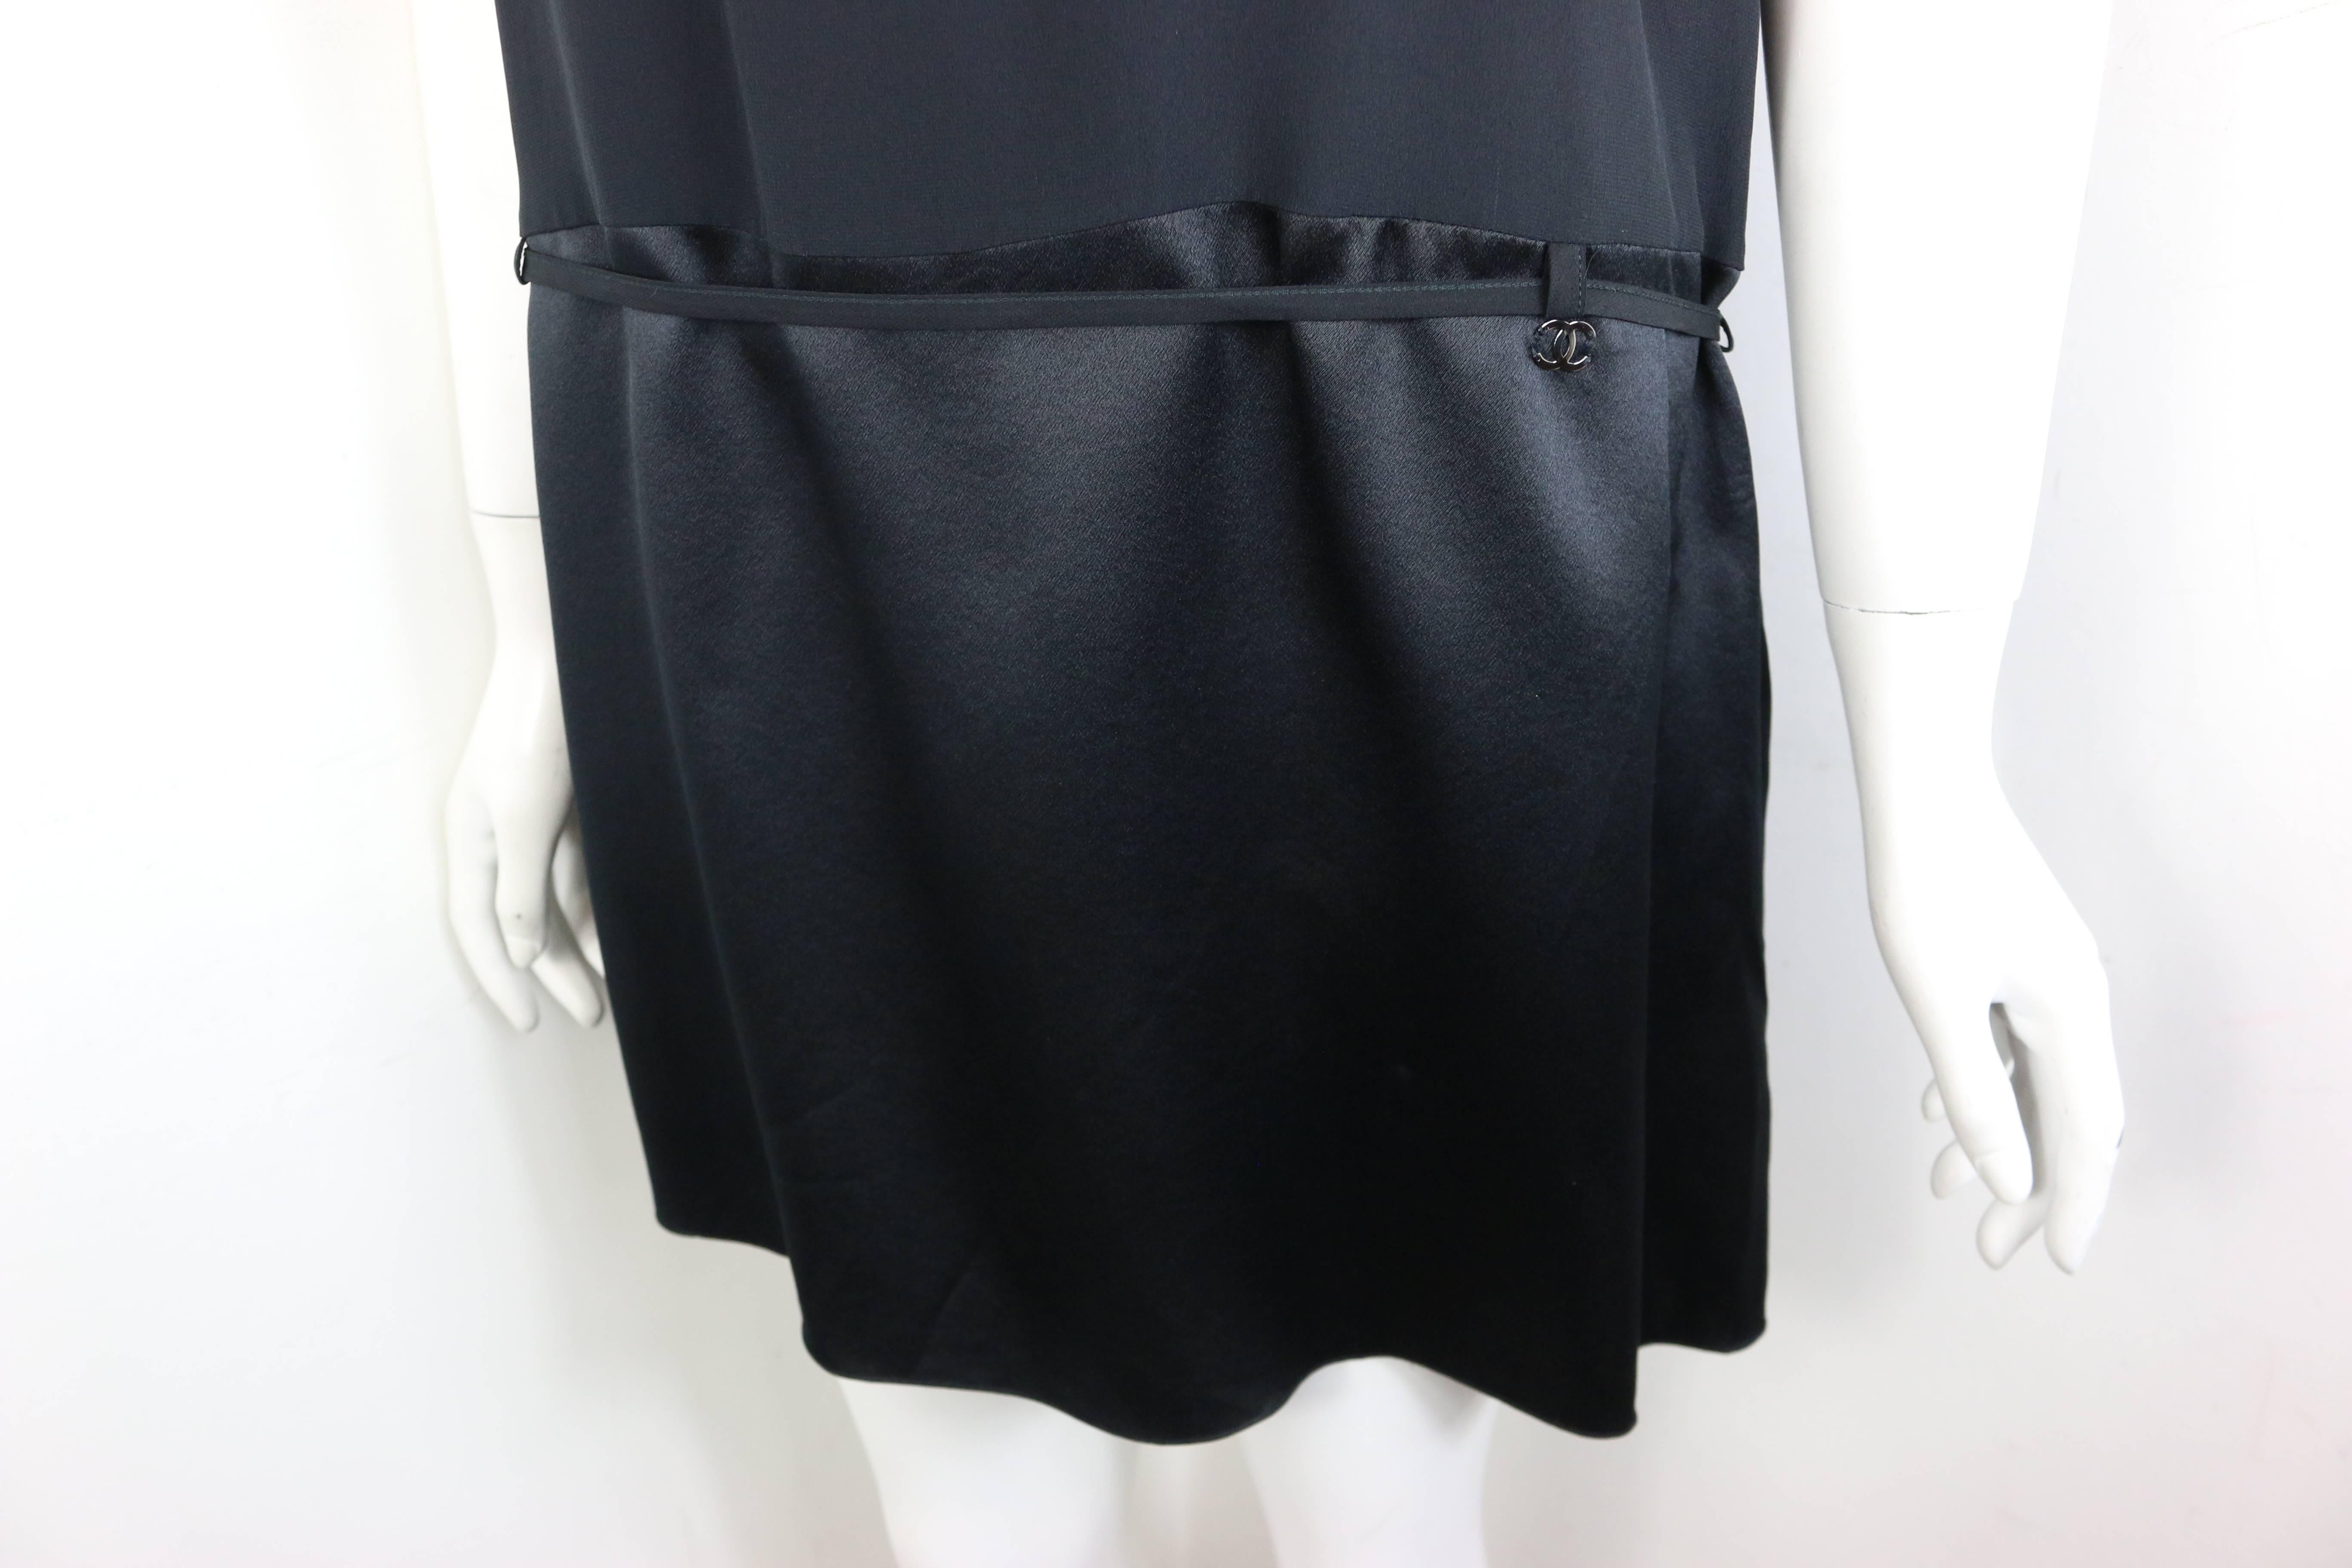 - Chanel black silk sleeveless round neck tunic from the year 2008 spring collection. 

- Featuring two different tones of silk material, which is lighter on the top and thicker on the bottom part. 

- Silver-toned 